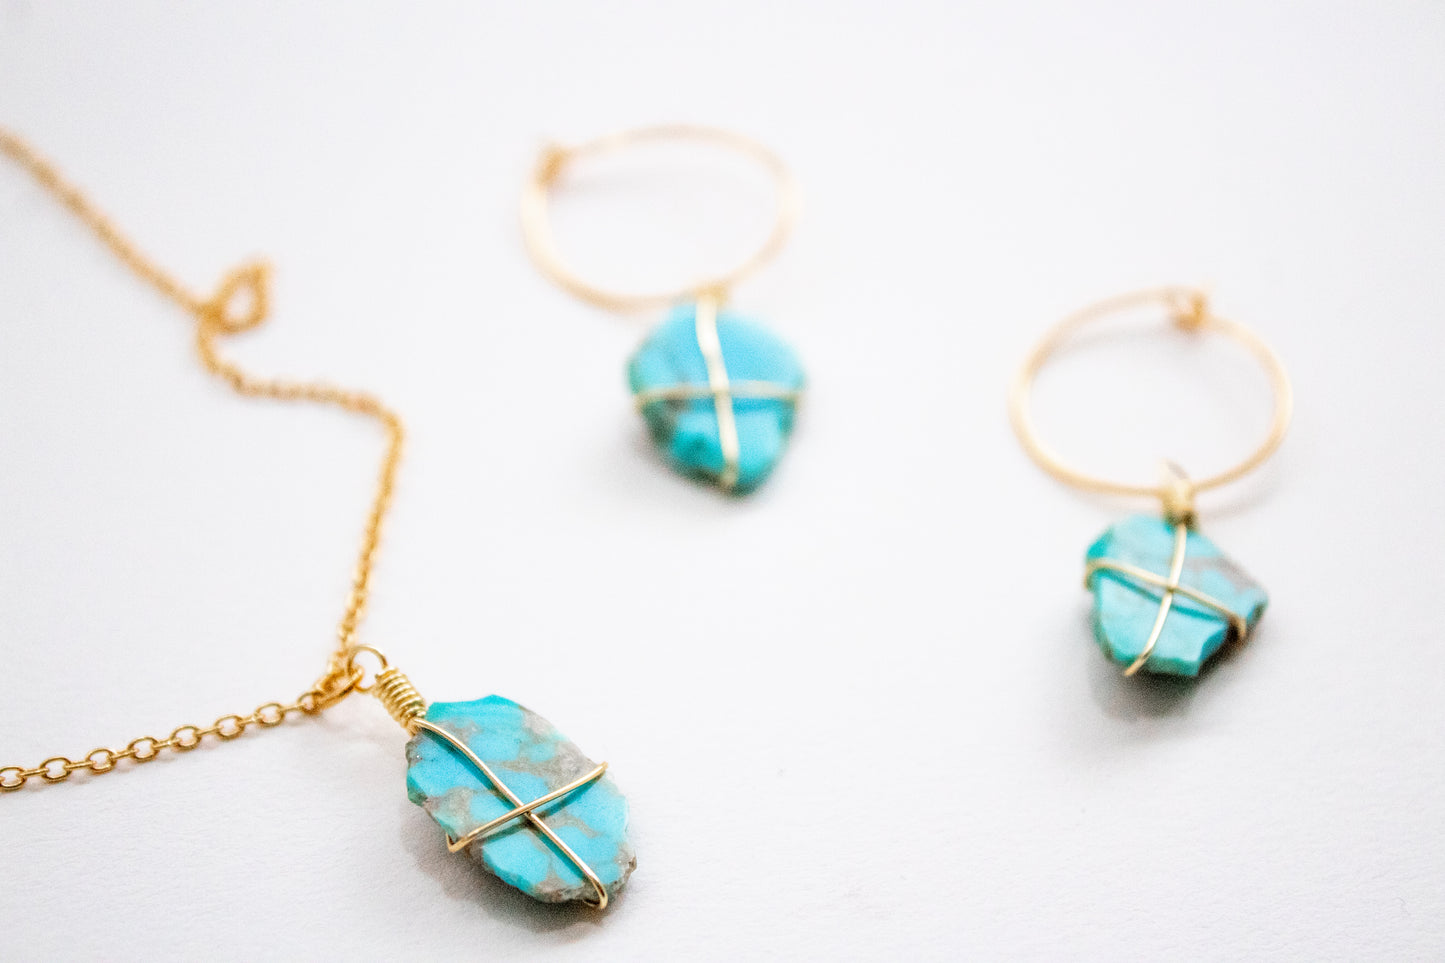 Ka'an. Minimalist necklace with turquoise